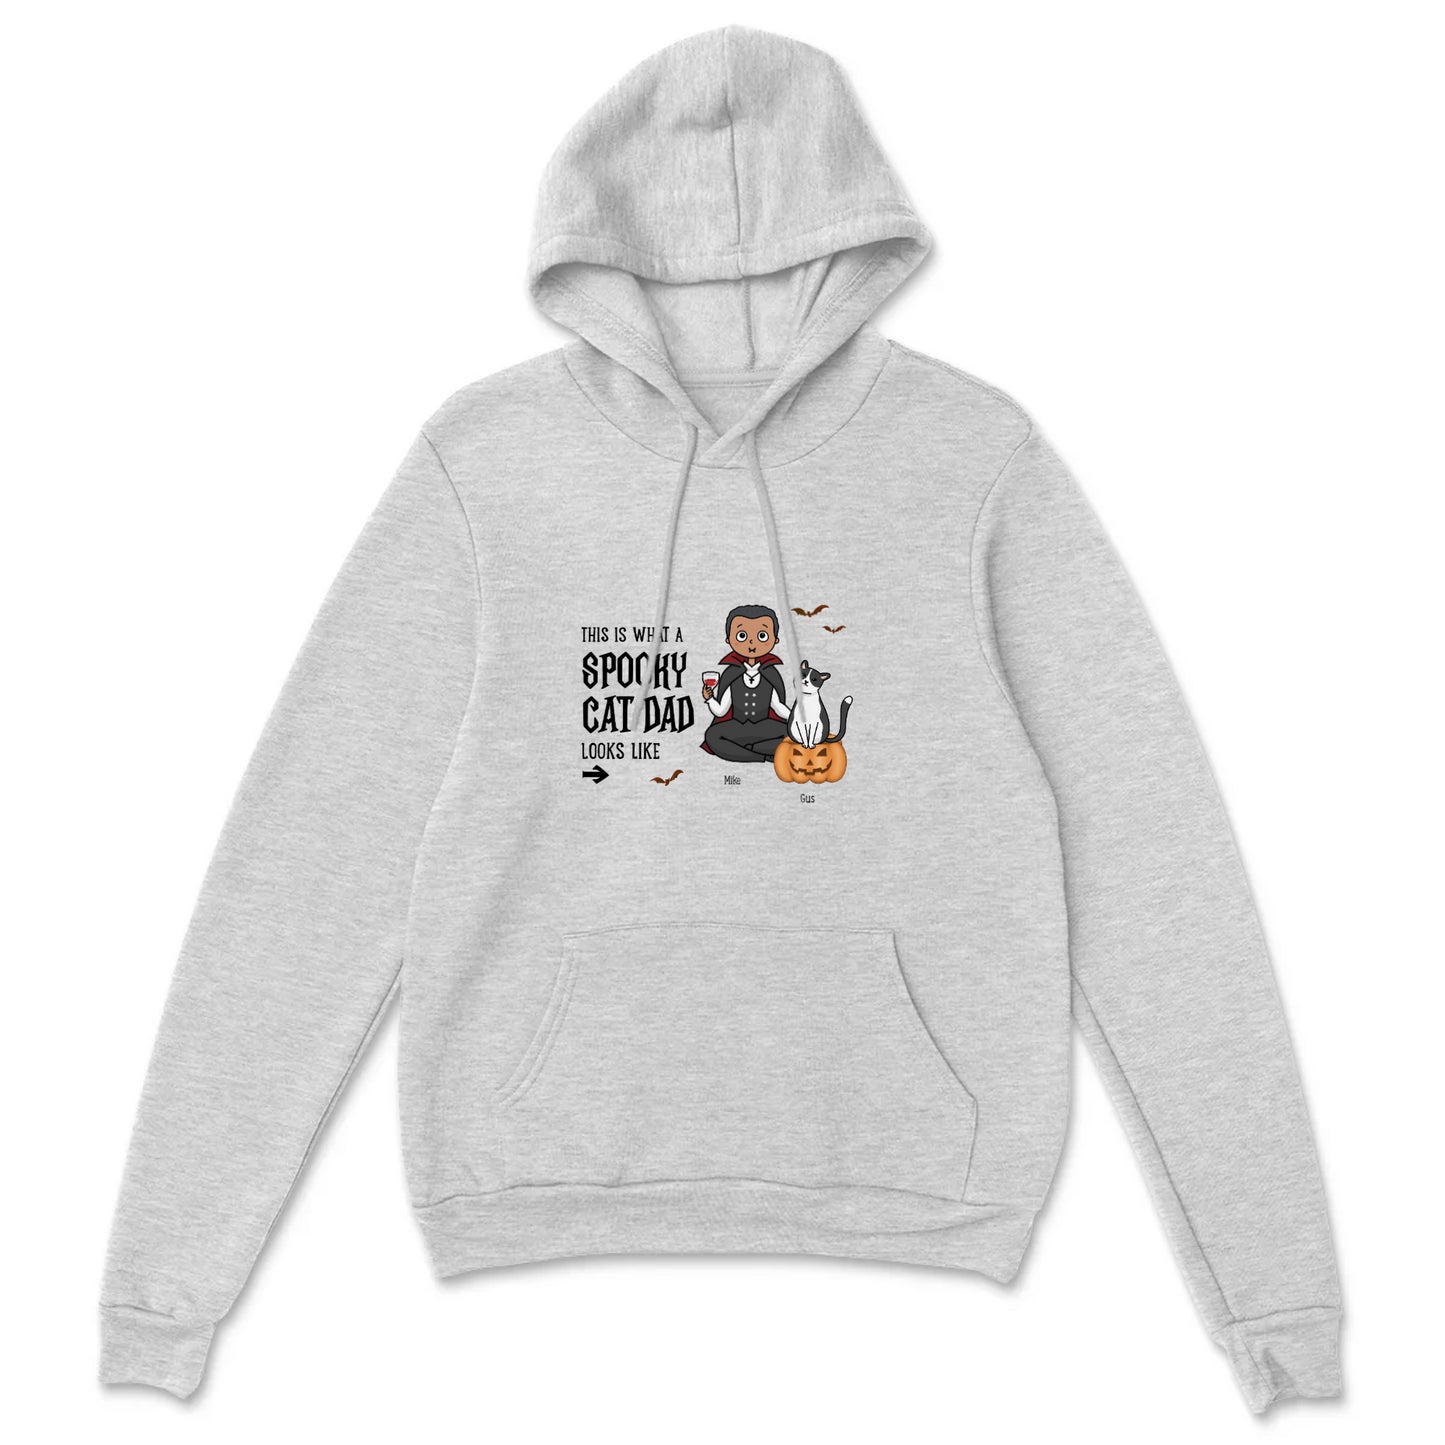 This is What a Spooky Cat Dad Looks Like Pullover Hoodie